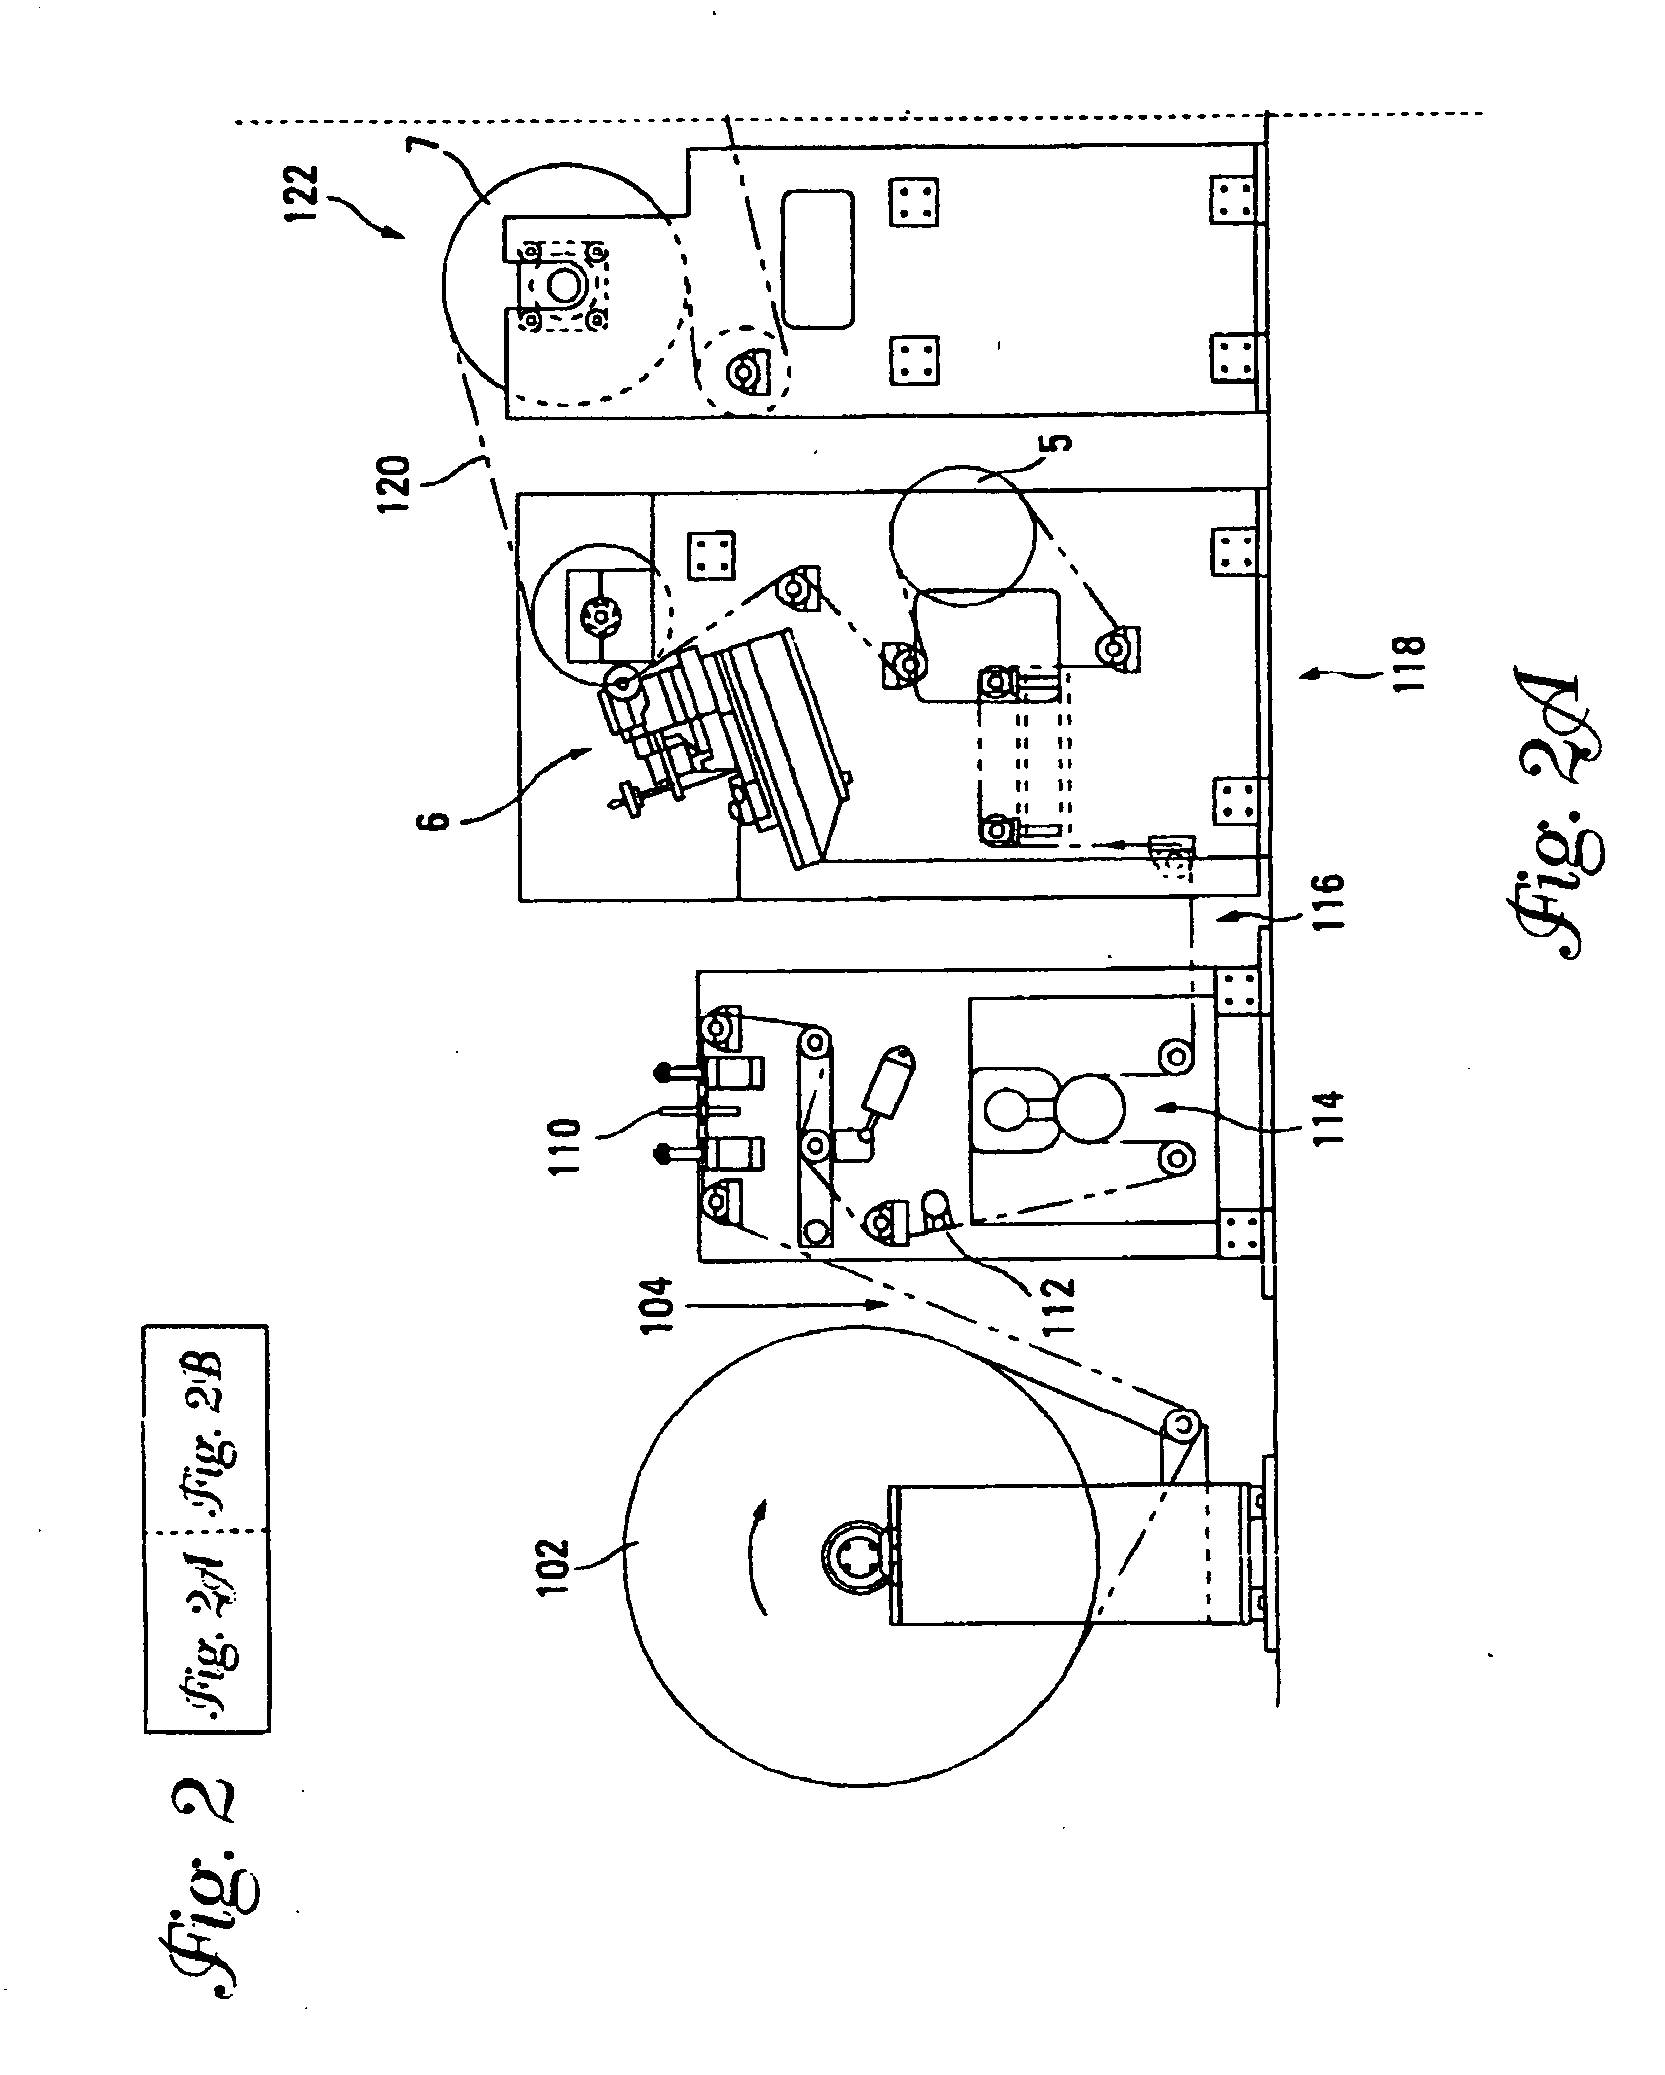 Apparatus and method for applying labels